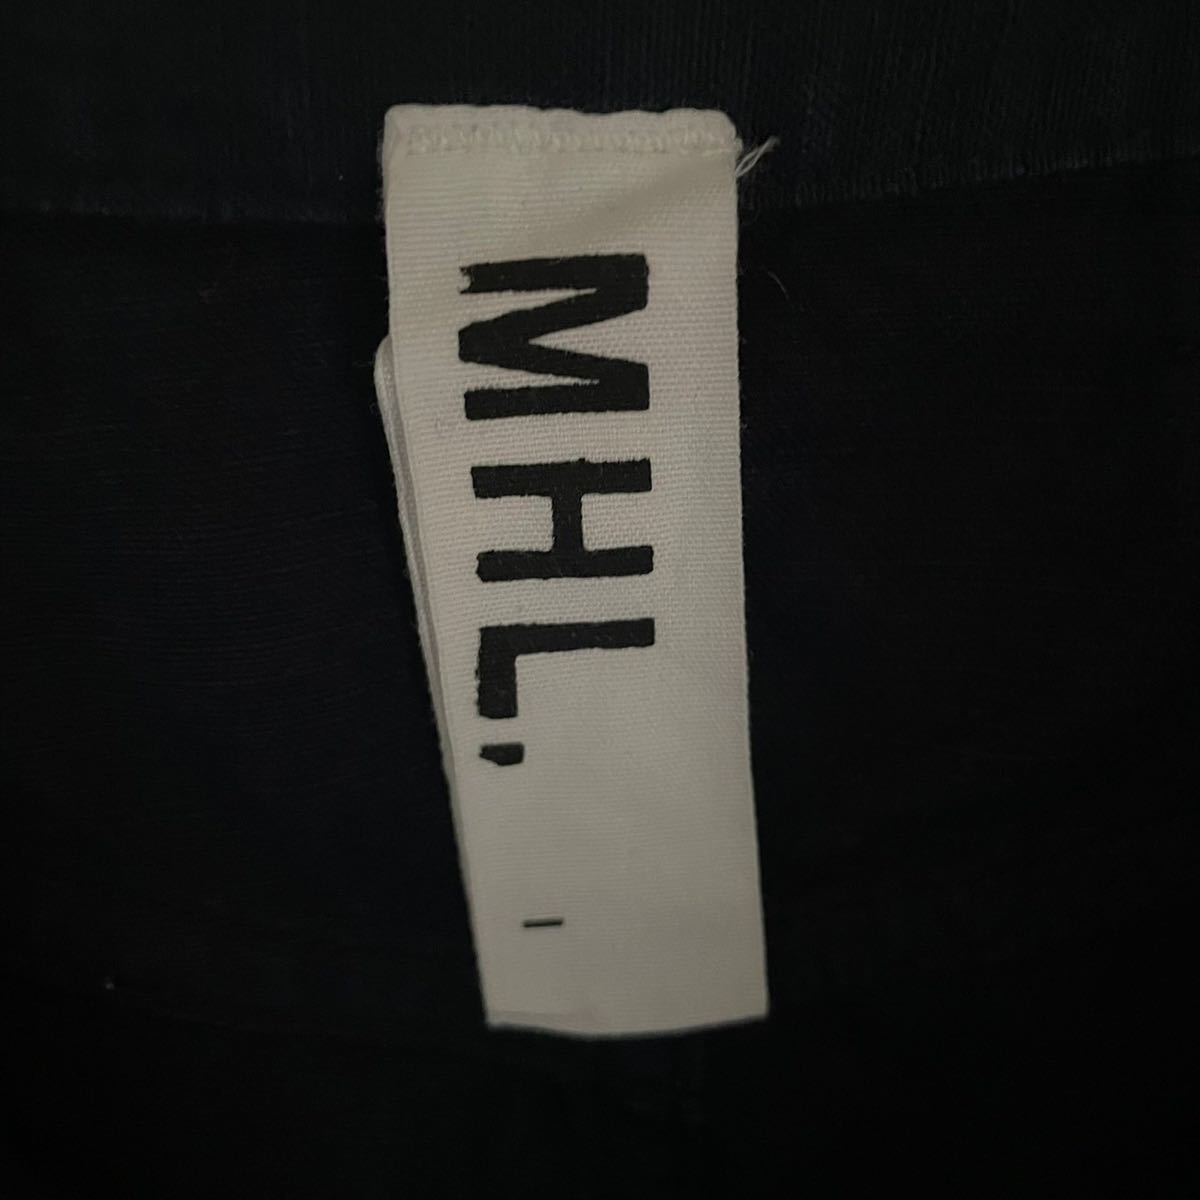 MHL. M H L super-beauty goods rare GARMENT DYE CANVAS chinos tapered tiger u The - wide linen cotton navy navy blue color size I